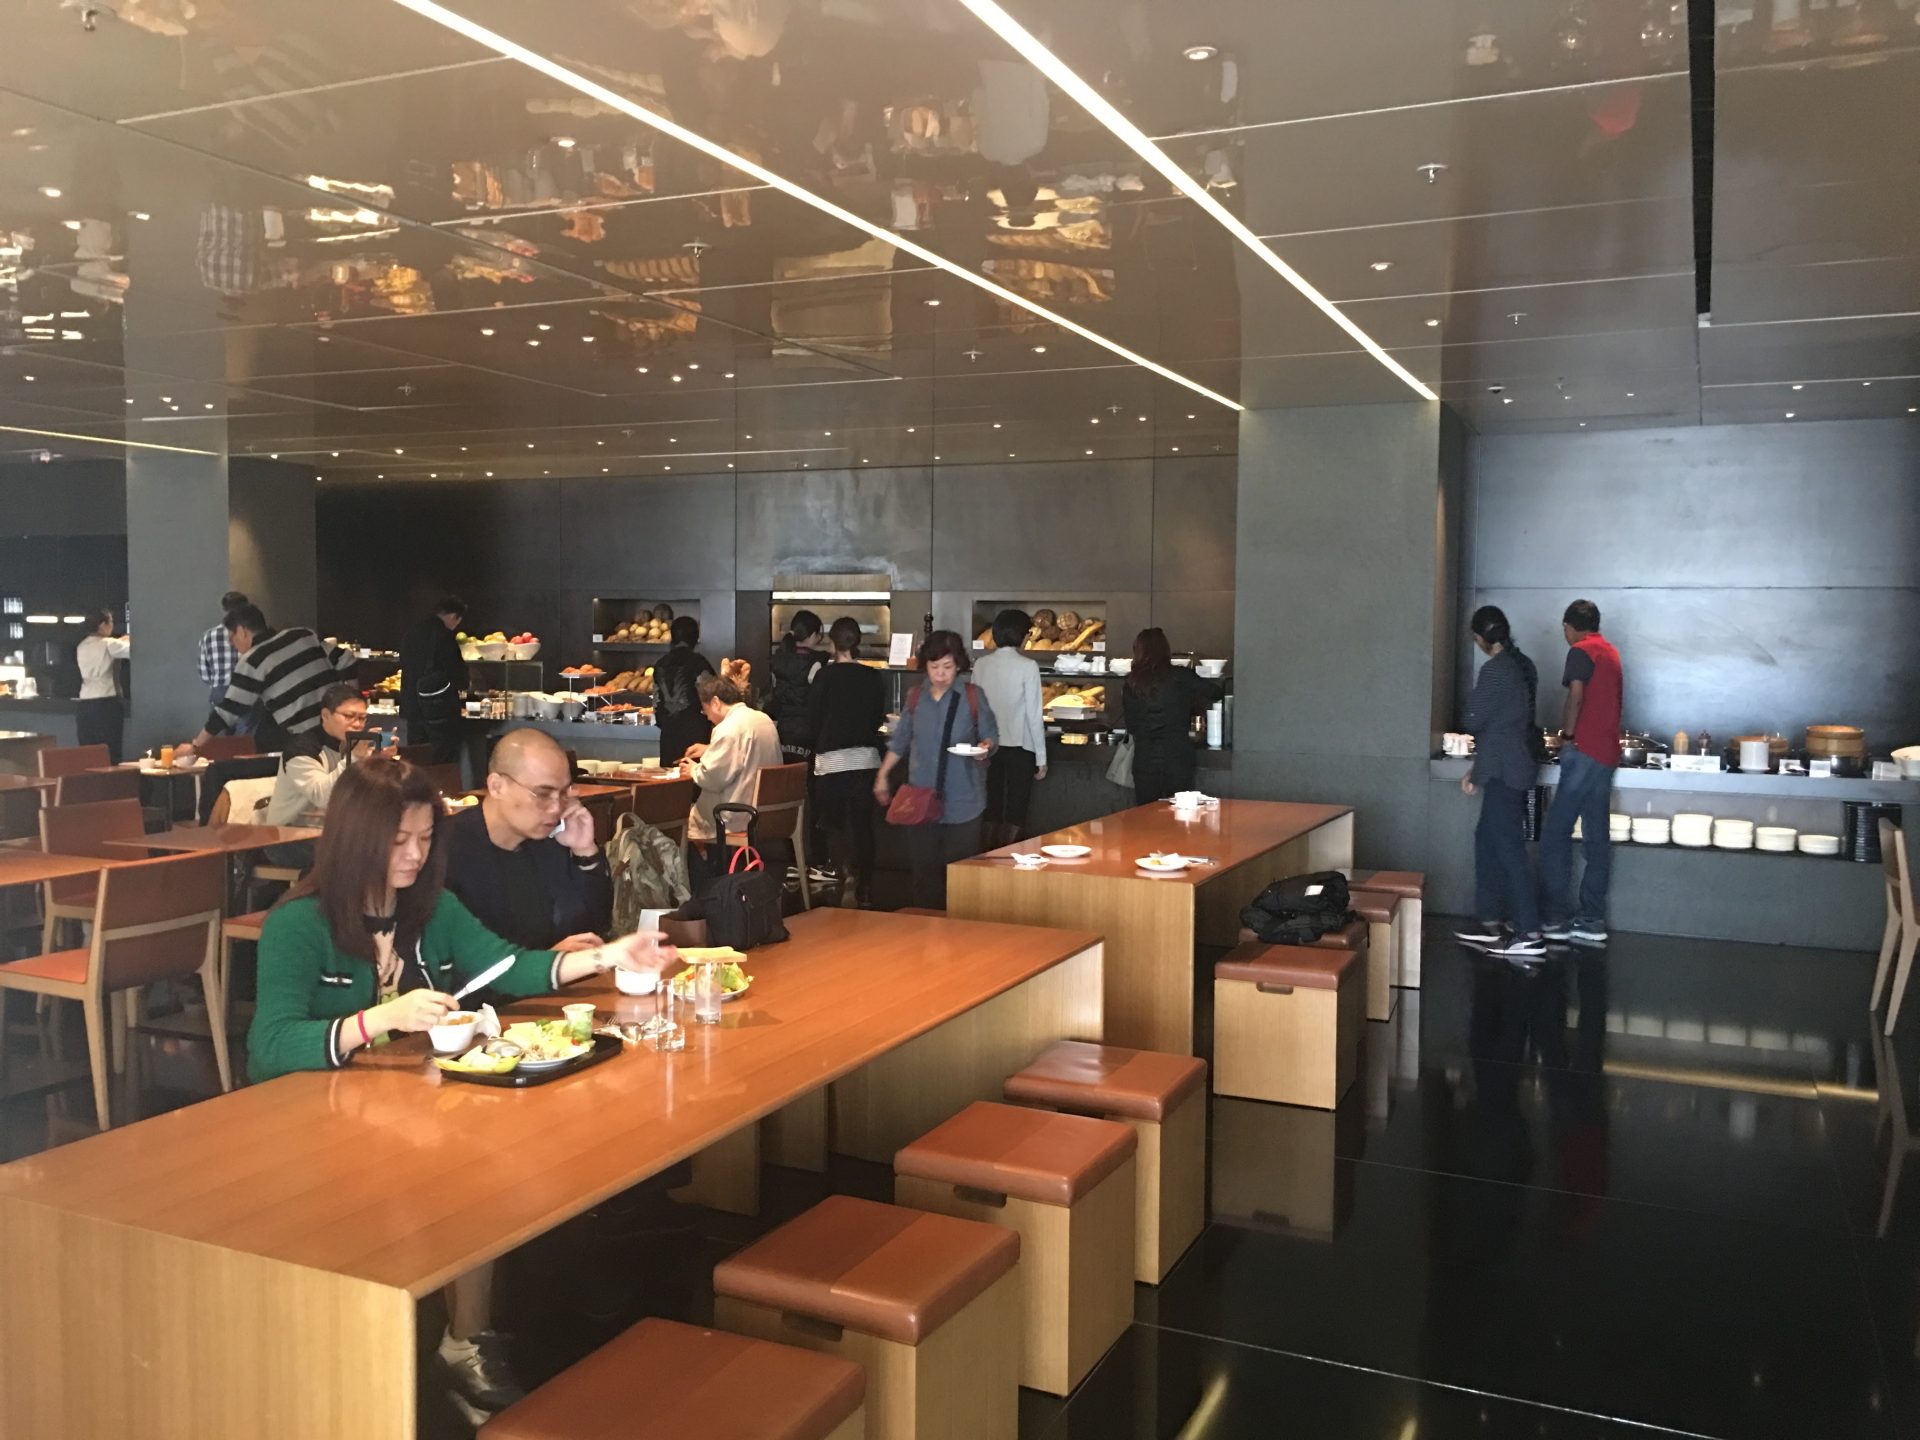 cathay pacific the bridge dining room - Cathay Pacific The Bridge Business Class Lounge Hong Kong review